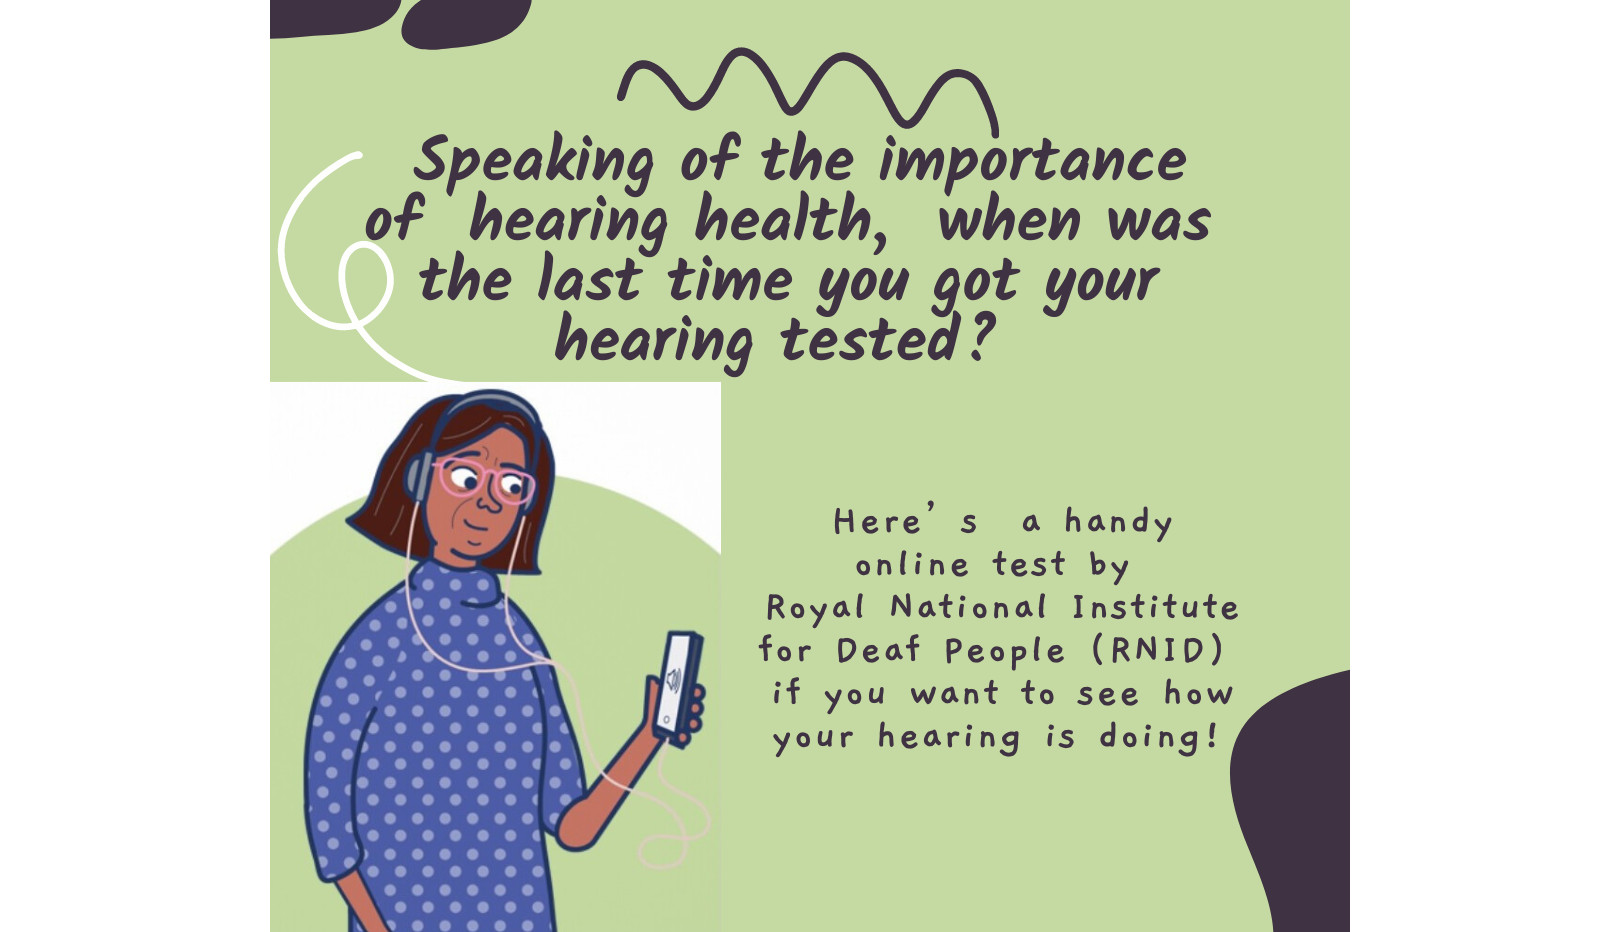 An advertisement of an online hearing test offered by RNID